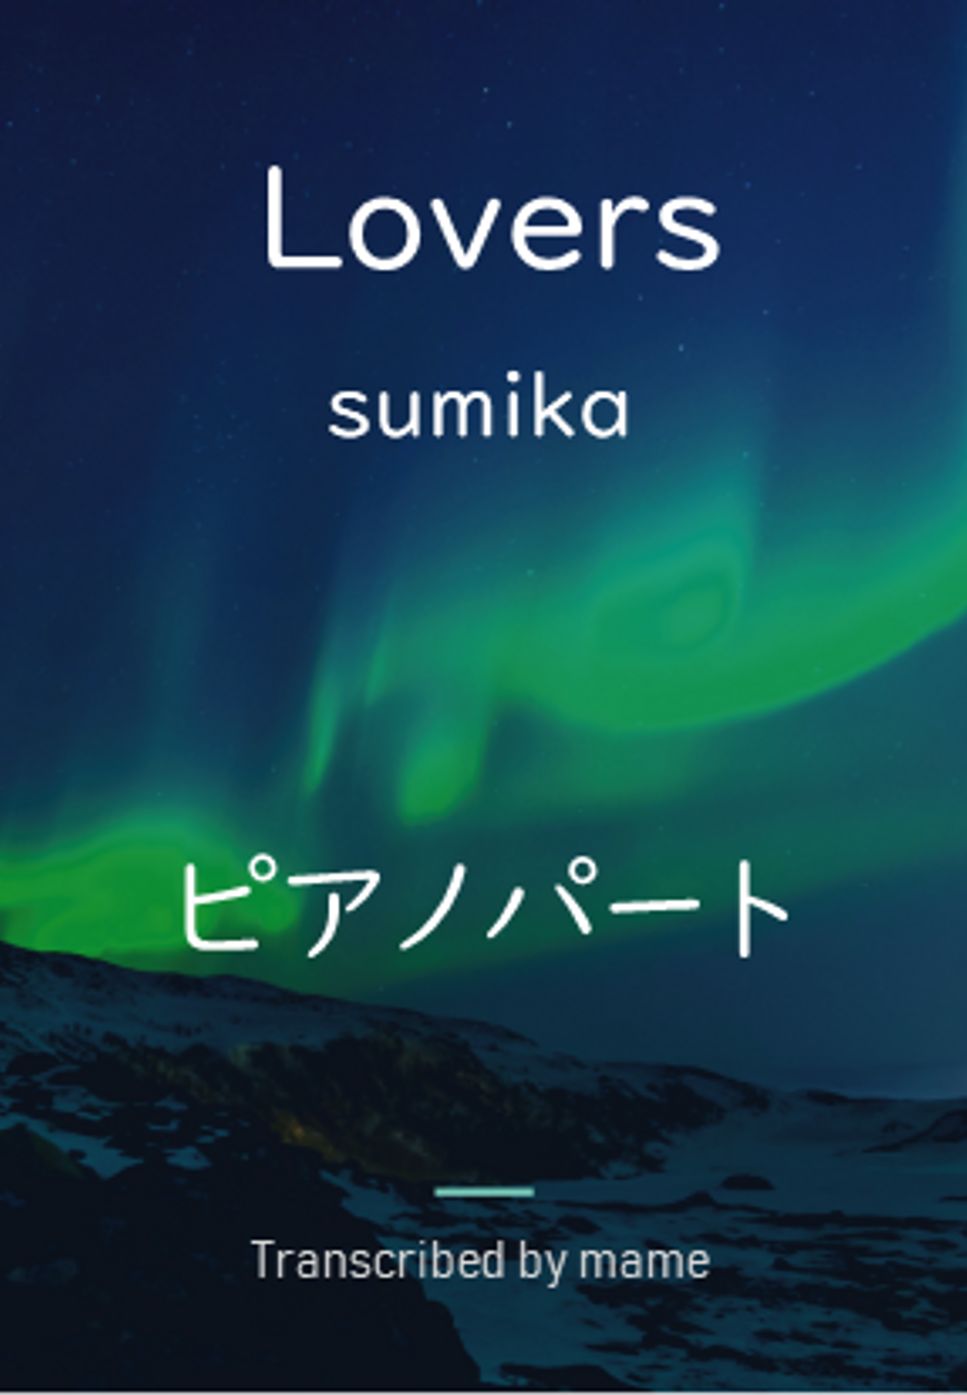 sumika - Lovers (ピアノパート) by mame